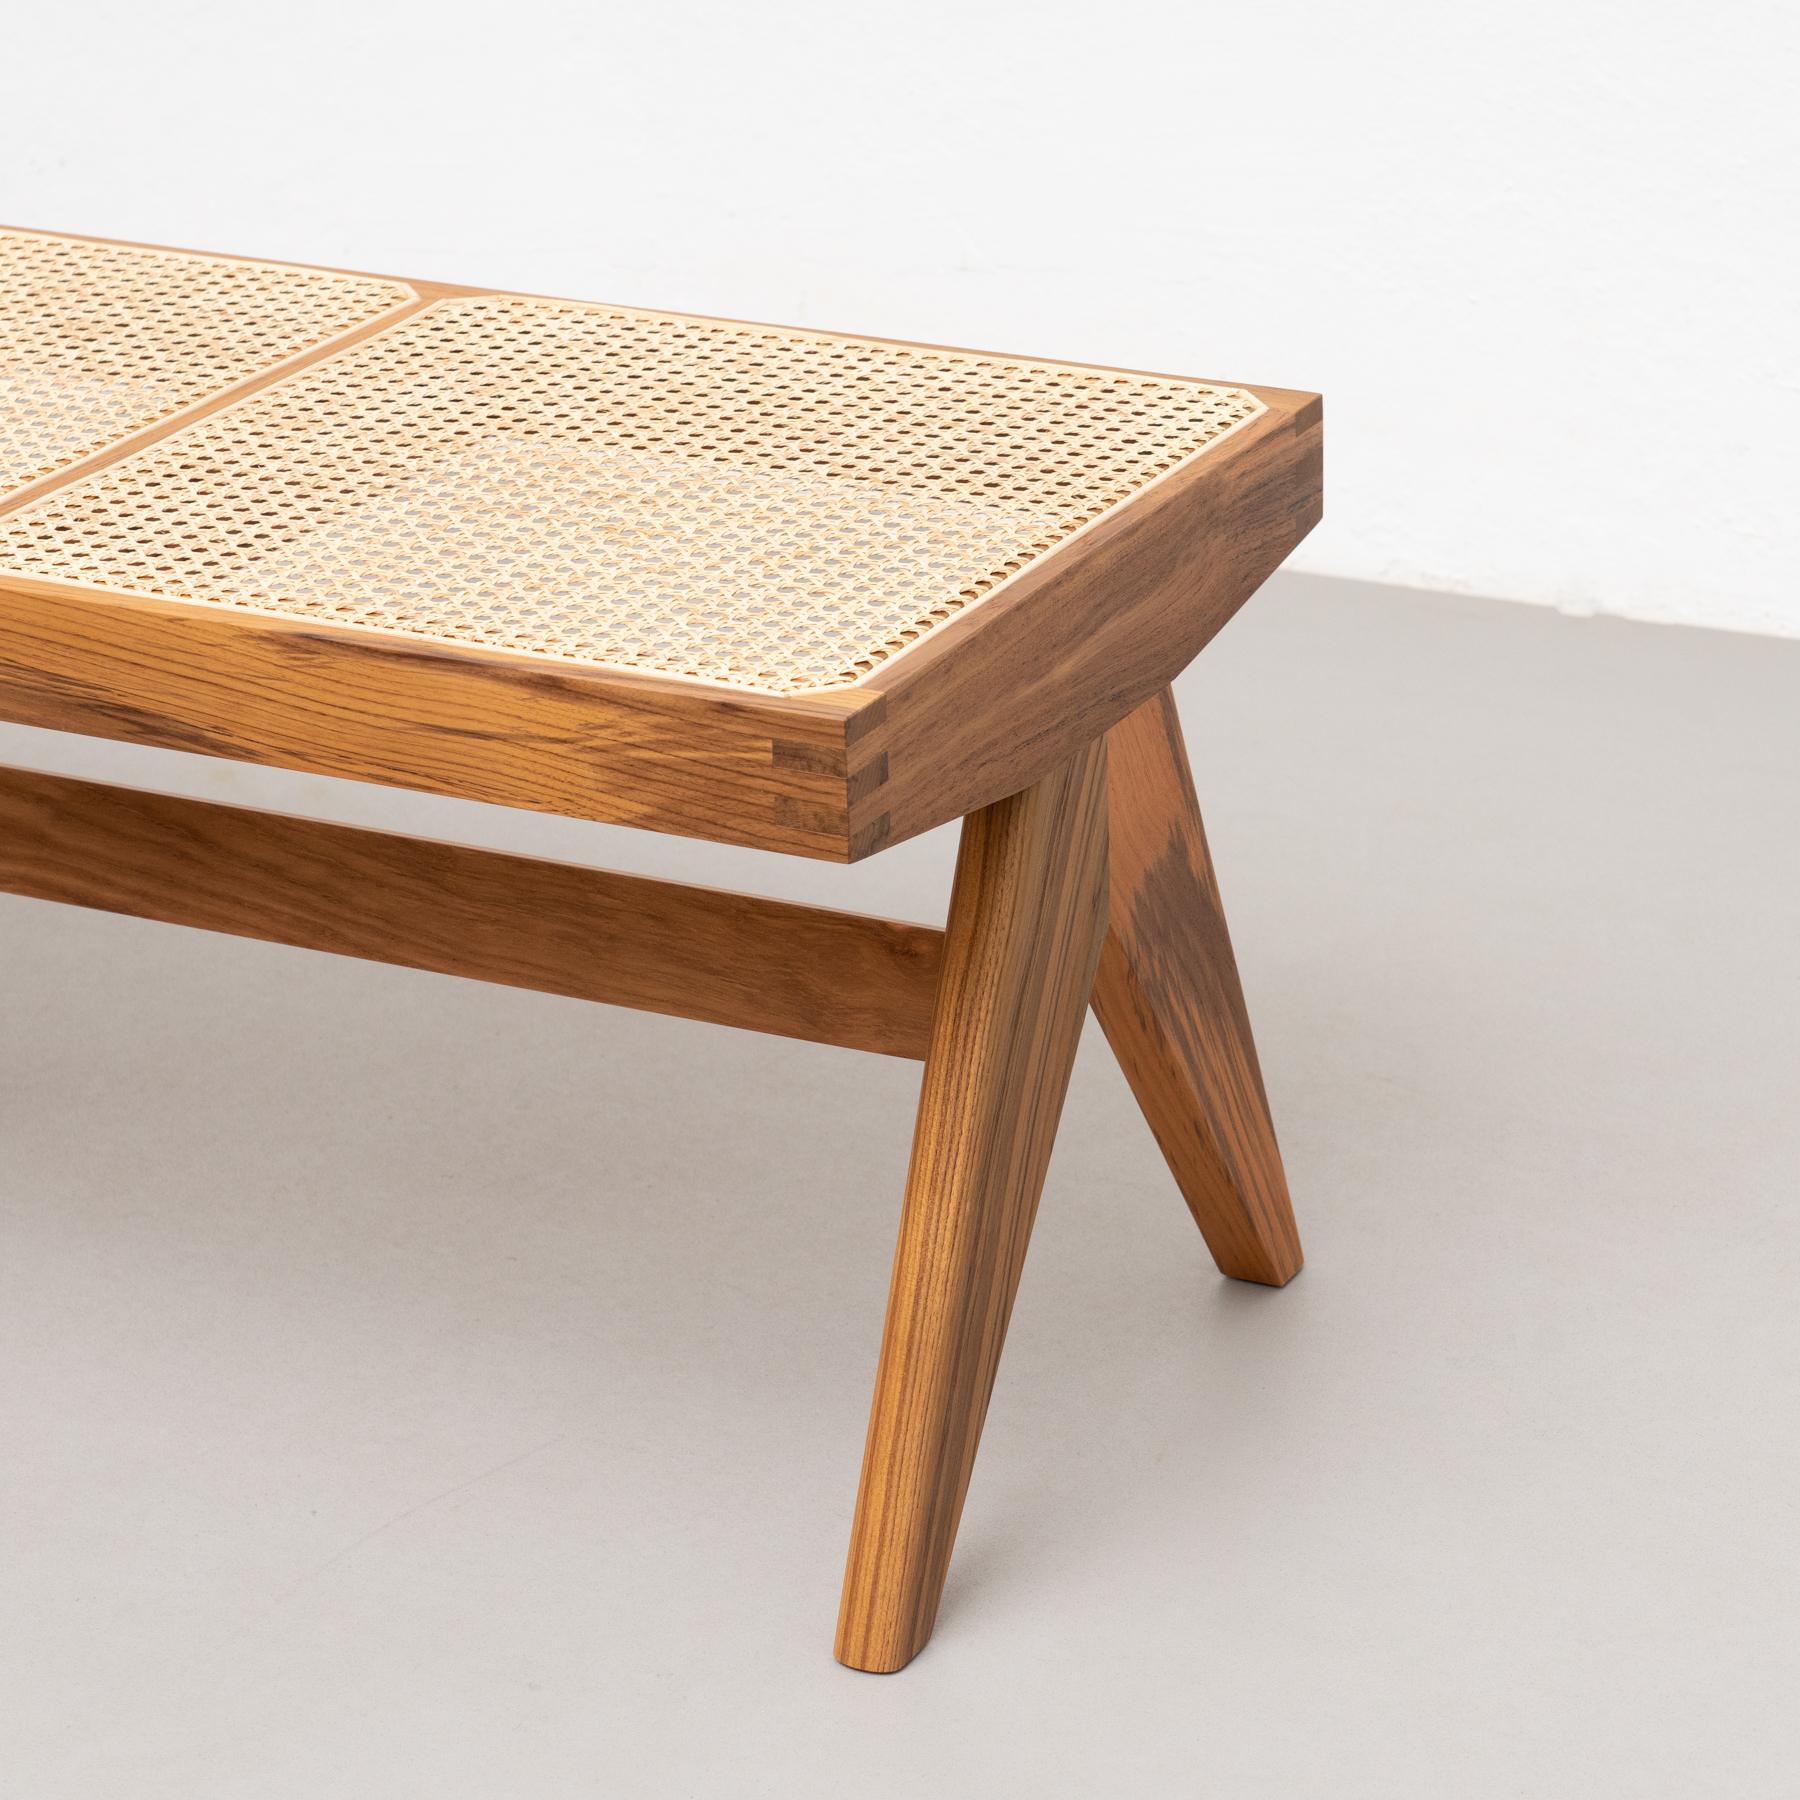 Pierre Jeanneret 057 Civil Bench, Wood and Woven Viennese Cane 3